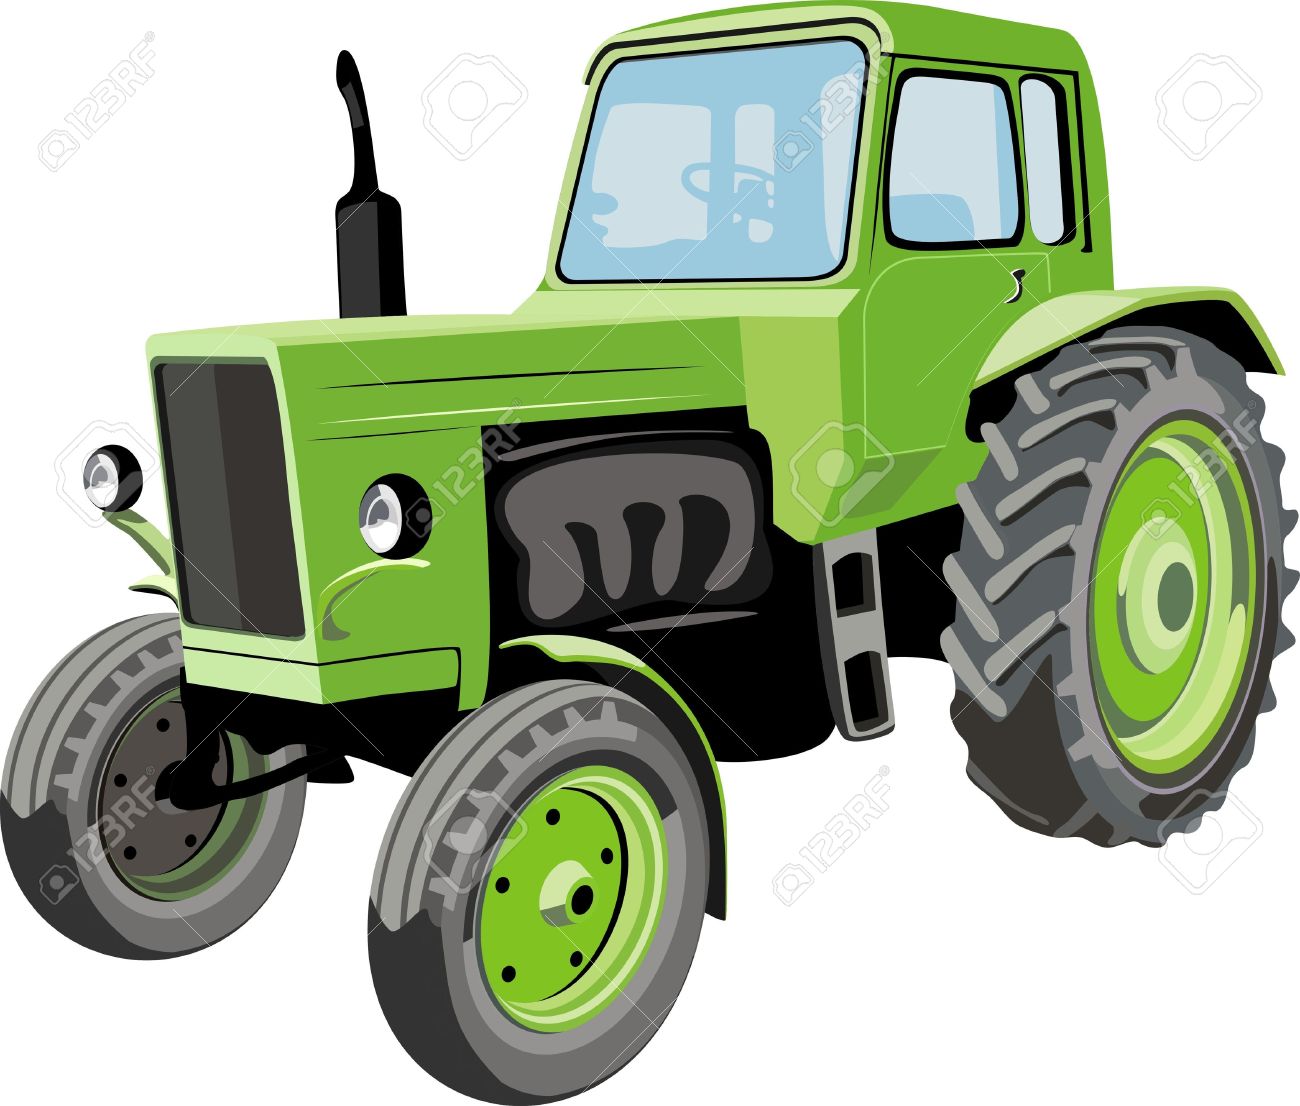 3,158 Tractor Cartoon Stock Vector Illustration And Royalty Free.